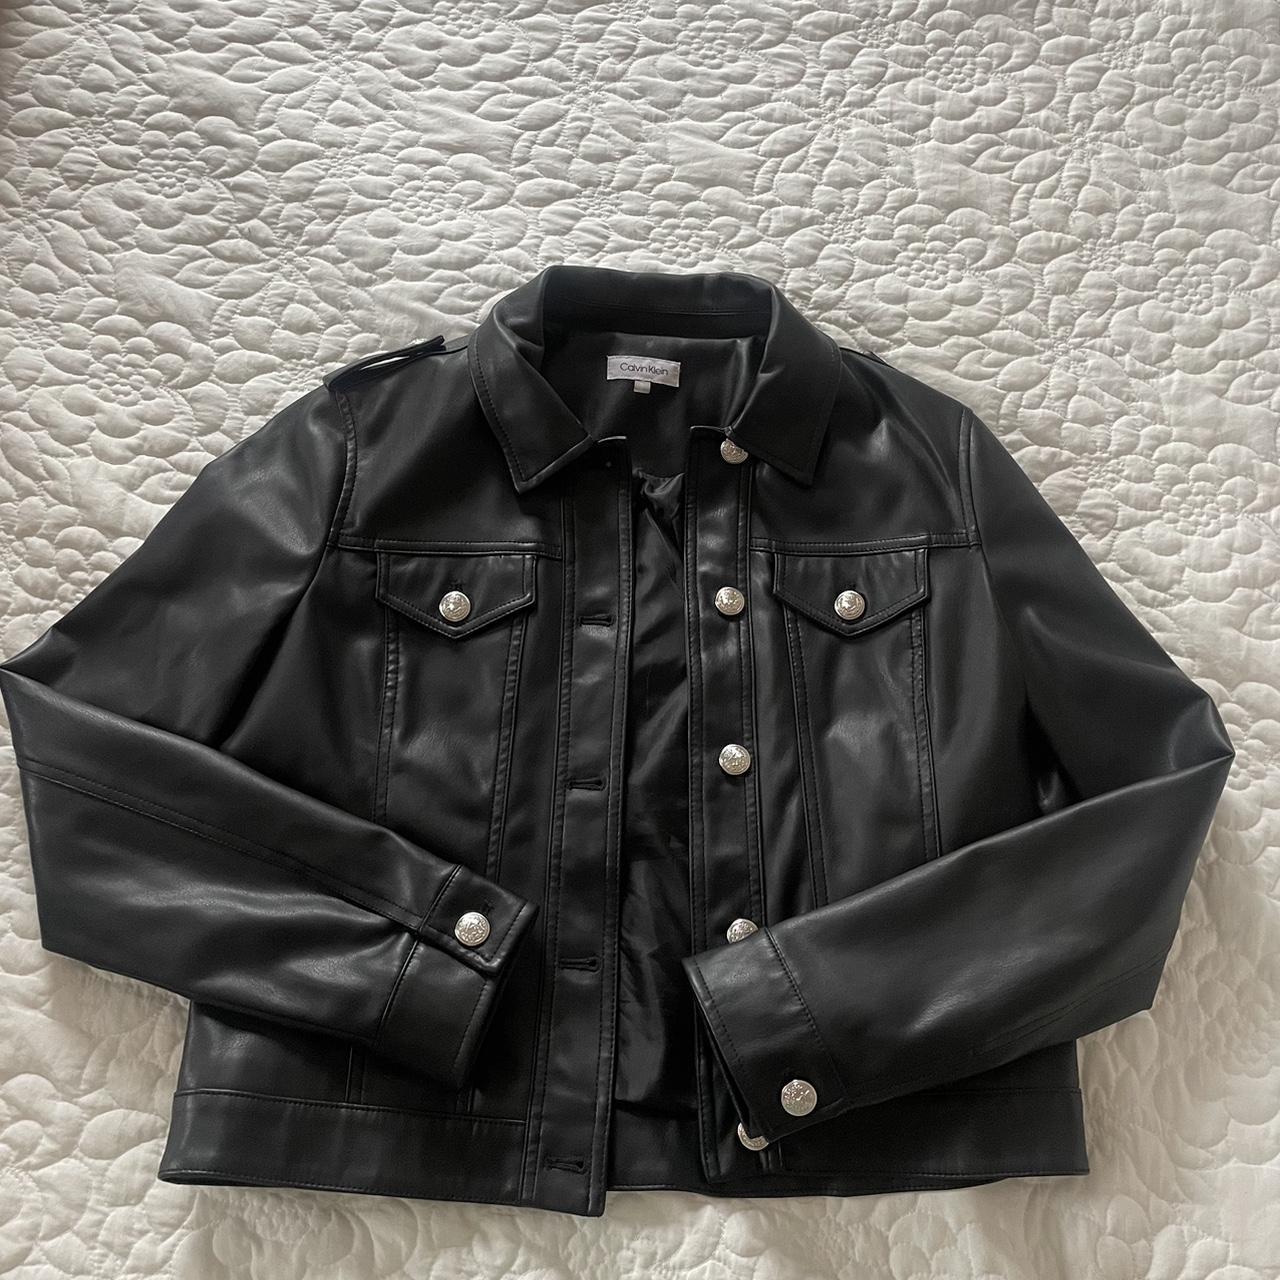 Calvin Klein Cropped Leather Jacket! so so cute and... - Depop